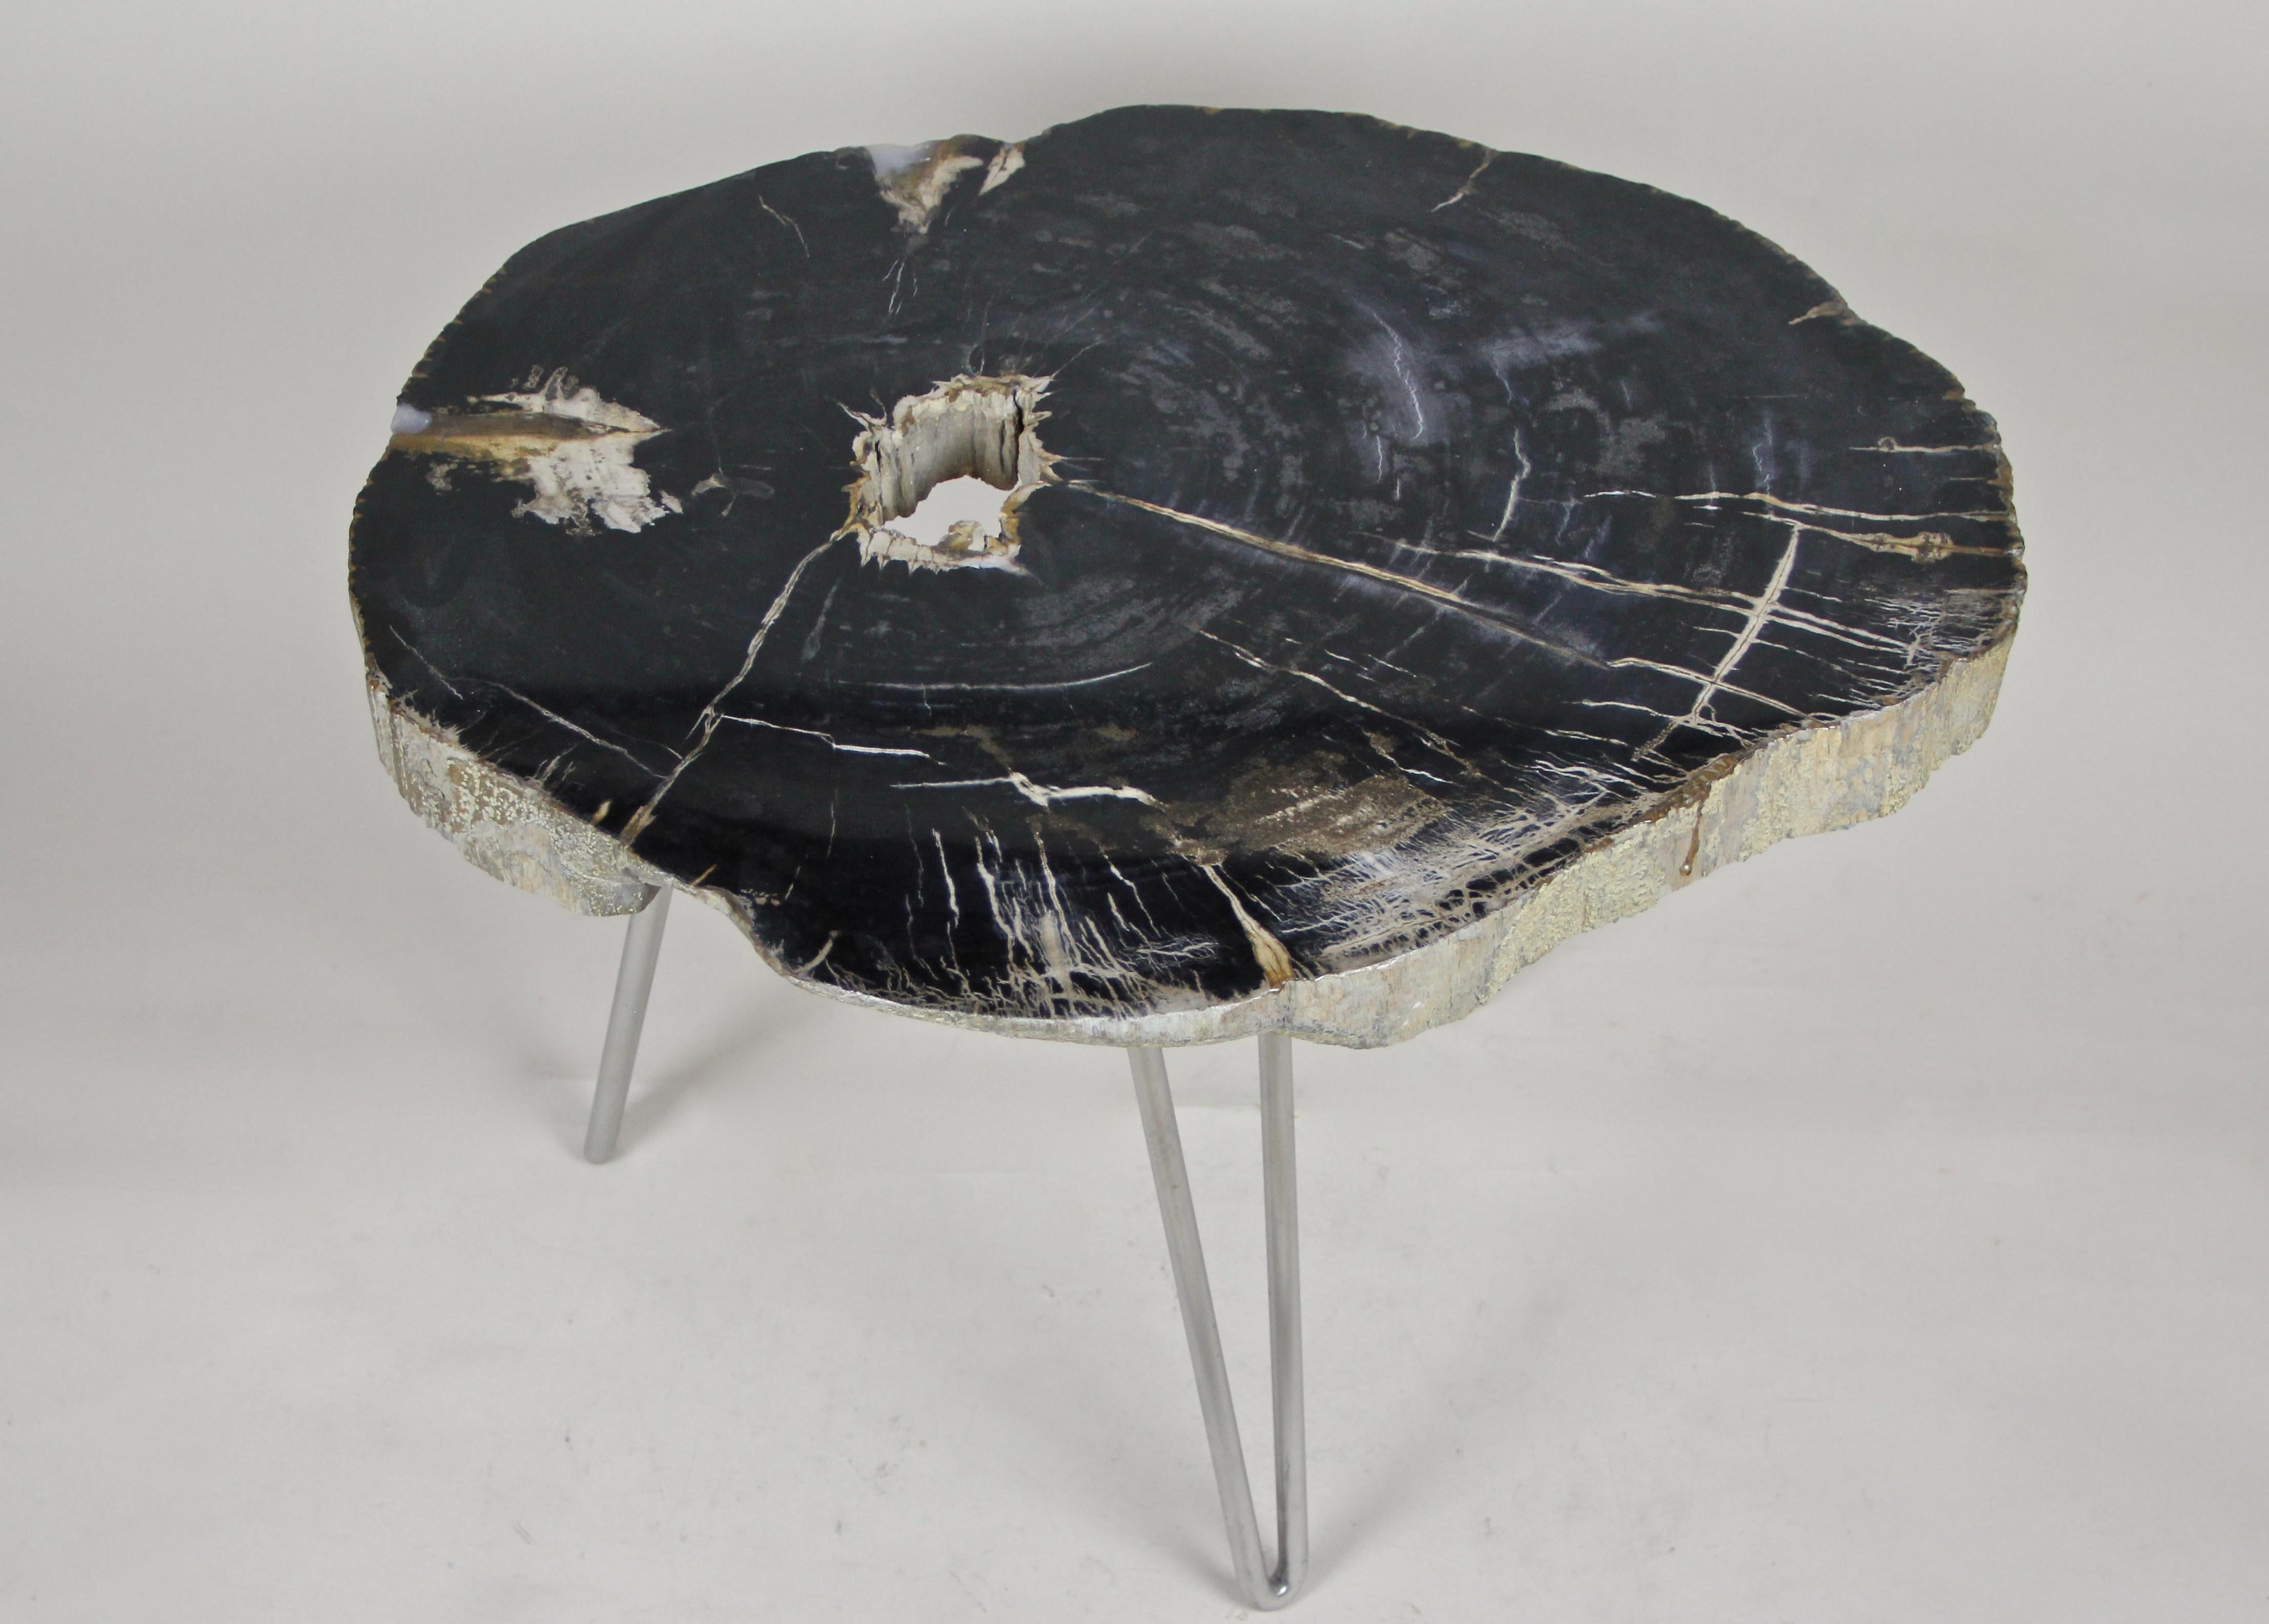 Contemporary petrified wood coffee table on stainless steel feet. A small, organic modern side table/ coffee table which plate consists of precious petrified wood, showing a black surface adorned by white veins running through it. A small natural